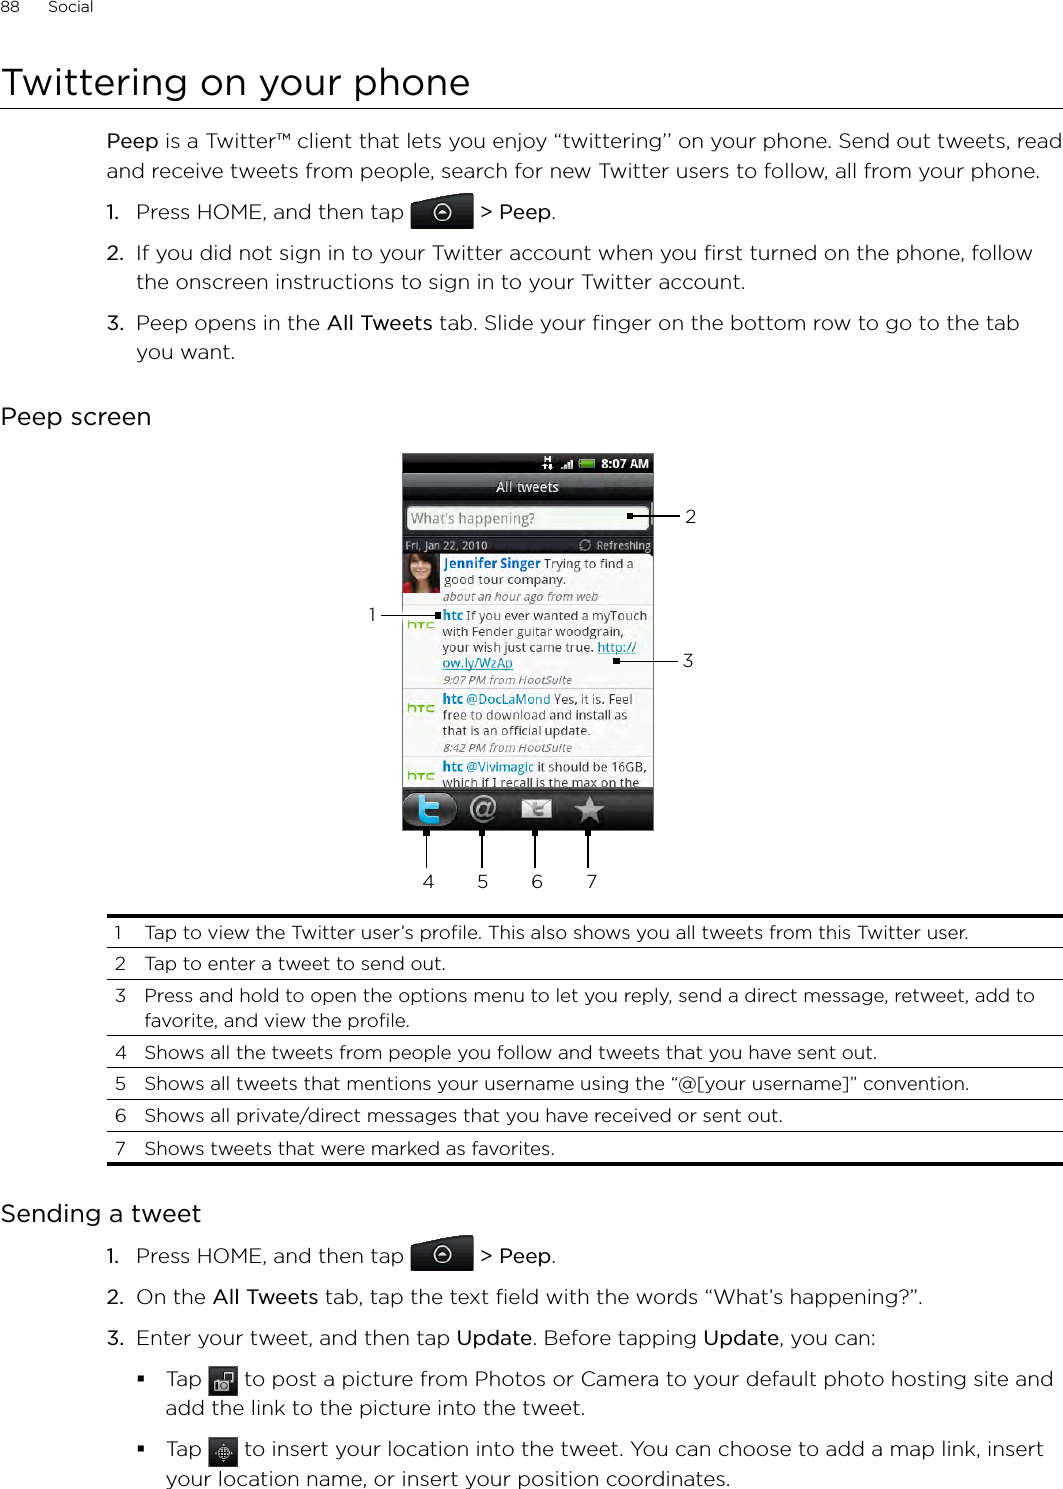 88      Social      Twittering on your phonePeep is a Twitter™ client that lets you enjoy “twittering’’ on your phone. Send out tweets, read and receive tweets from people, search for new Twitter users to follow, all from your phone.1.  Press HOME, and then tap  &gt; Peep.2.  If you did not sign in to your Twitter account when you first turned on the phone, follow the onscreen instructions to sign in to your Twitter account.3.  Peep opens in the All Tweets tab. Slide your finger on the bottom row to go to the tab you want.Peep screen234 5 6 711  Tap to view the Twitter user’s profile. This also shows you all tweets from this Twitter user. 2  Tap to enter a tweet to send out. 3  Press and hold to open the options menu to let you reply, send a direct message, retweet, add to favorite, and view the profile.4  Shows all the tweets from people you follow and tweets that you have sent out. 5  Shows all tweets that mentions your username using the “@[your username]” convention. 6  Shows all private/direct messages that you have received or sent out. 7  Shows tweets that were marked as favorites.Sending a tweetPress HOME, and then tap  &gt; Peep.On the All Tweets tab, tap the text field with the words “What’s happening?”.    Enter your tweet, and then tap Update. Before tapping Update, you can: Tap   to post a picture from Photos or Camera to your default photo hosting site and add the link to the picture into the tweet.Tap   to insert your location into the tweet. You can choose to add a map link, insert your location name, or insert your position coordinates.1.2.3.